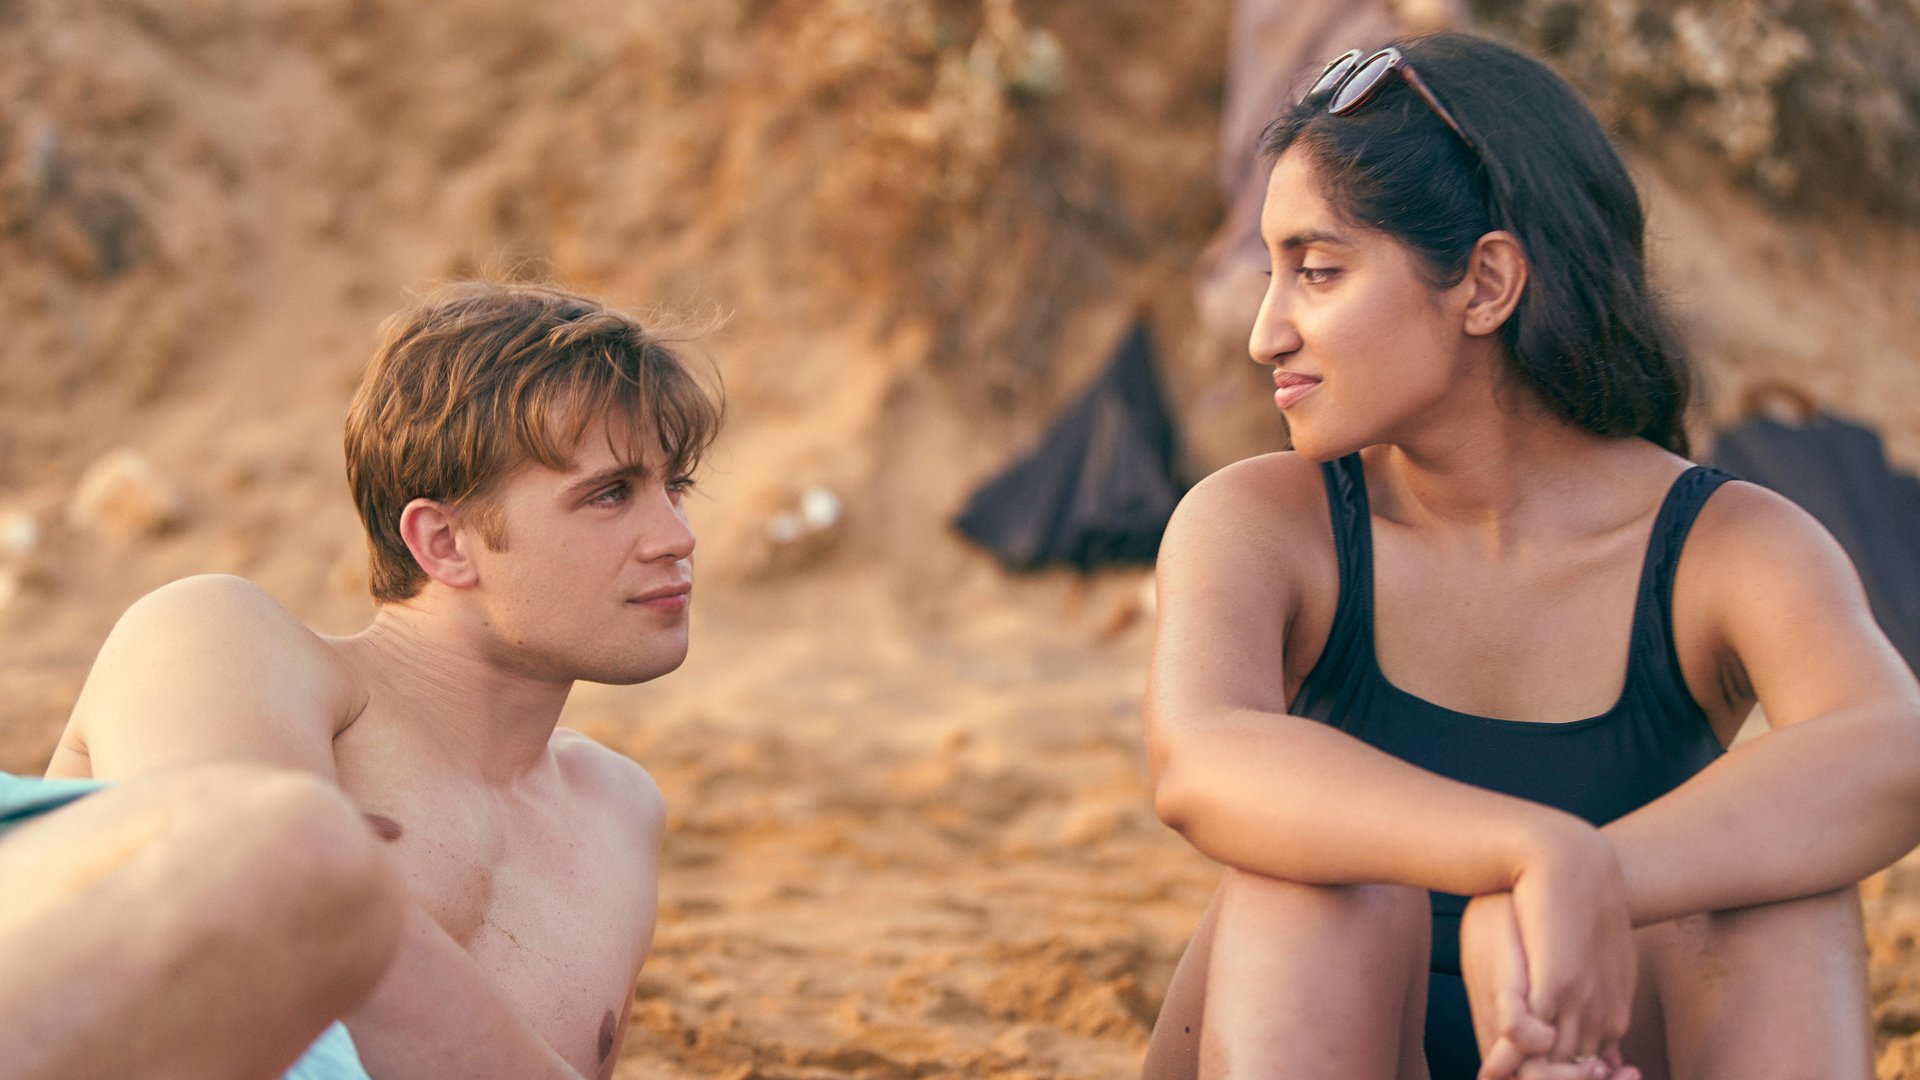 A young man and young woman sit on the beach looking romantically at each other.